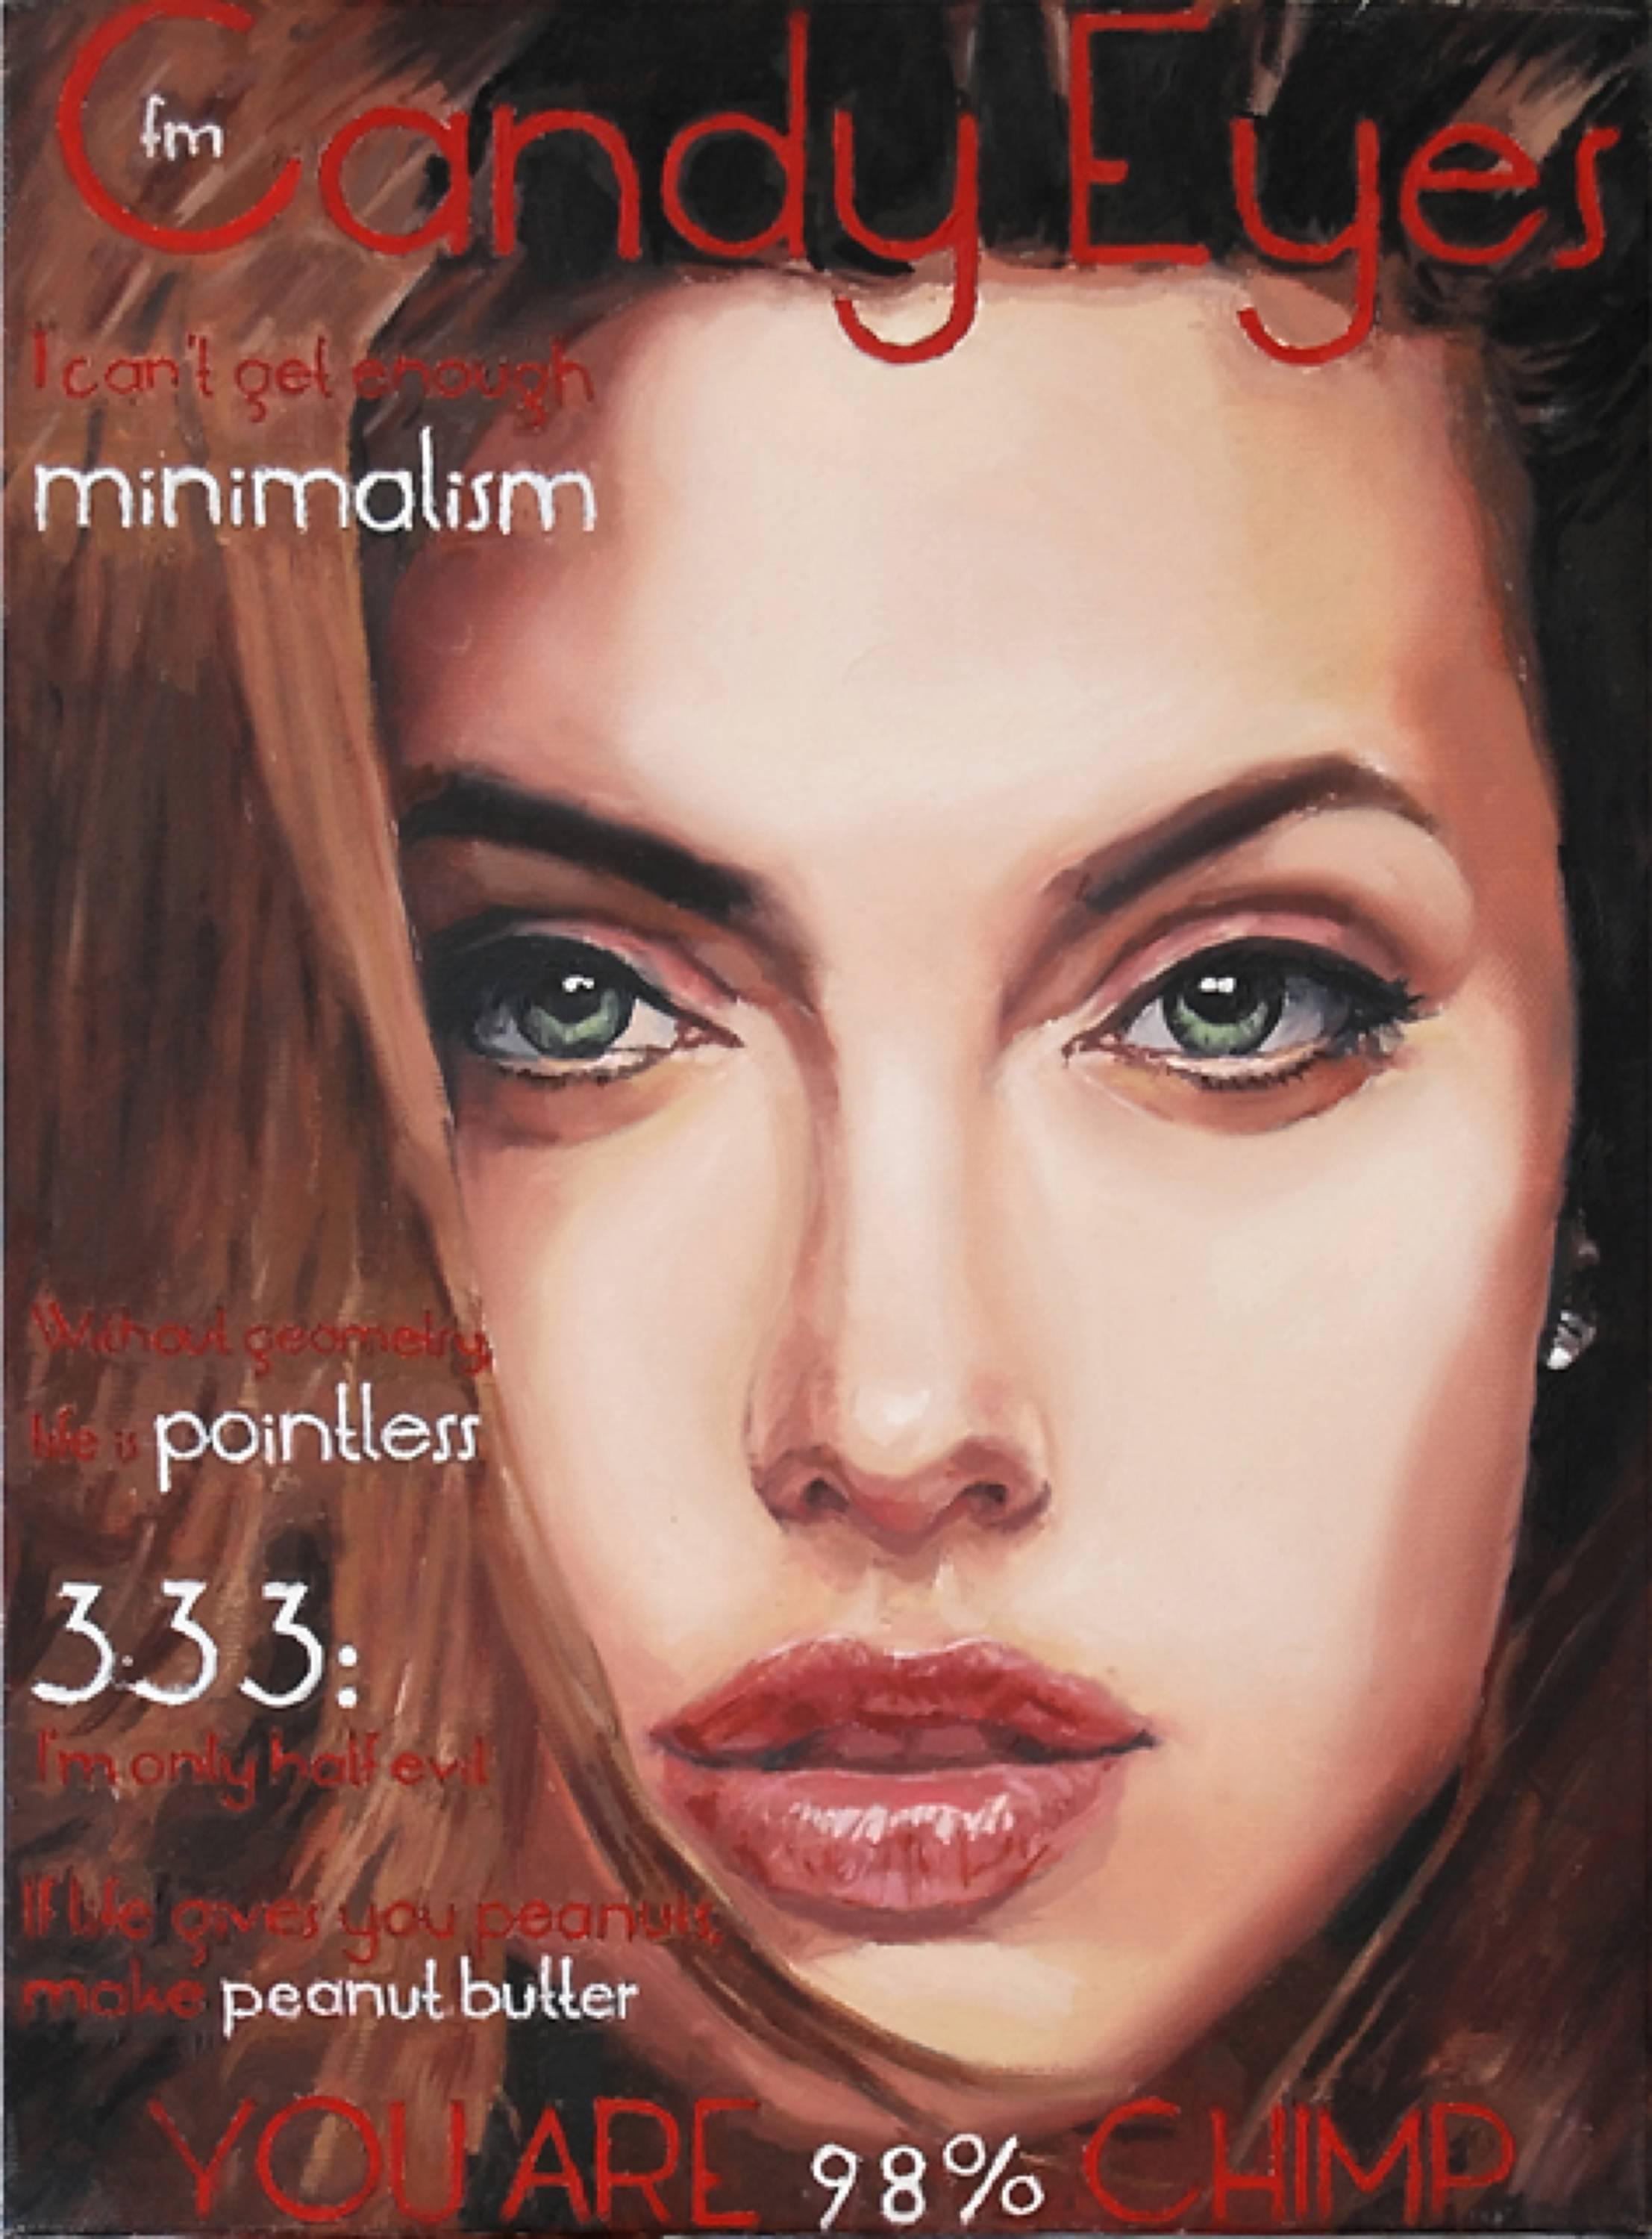 Mihai Florea Figurative Painting - Candy Eyes issue #2 - 21st Century, Portrait, Red, Angelina Jolie, Small, Oil 